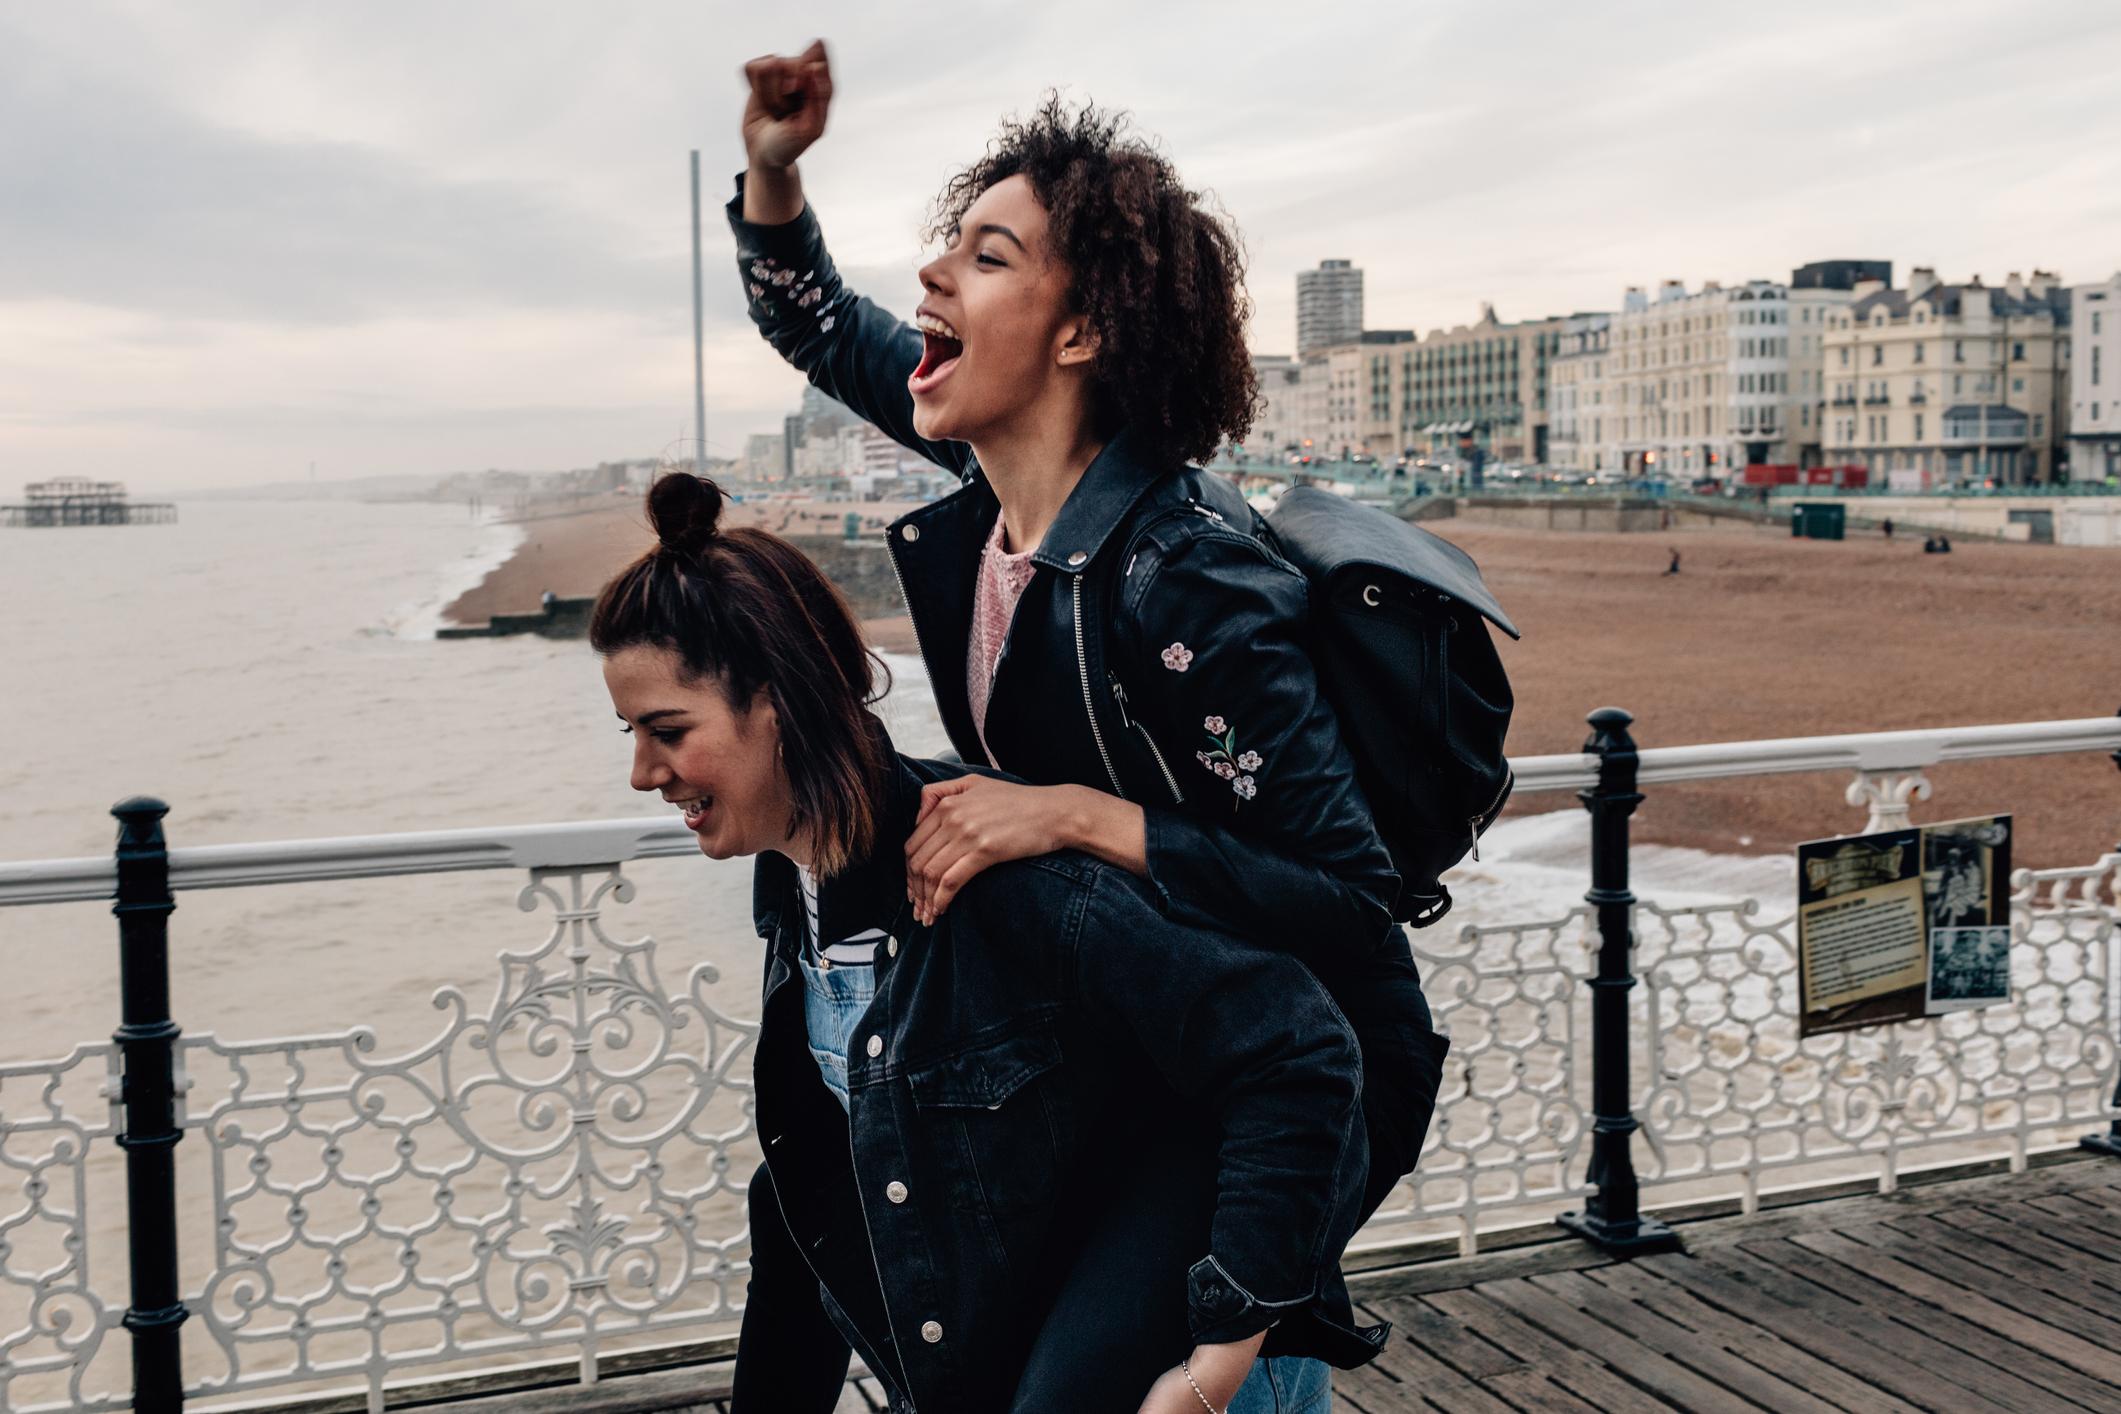  One woman is carrying another woman on her back while they have fun at the seaside.  